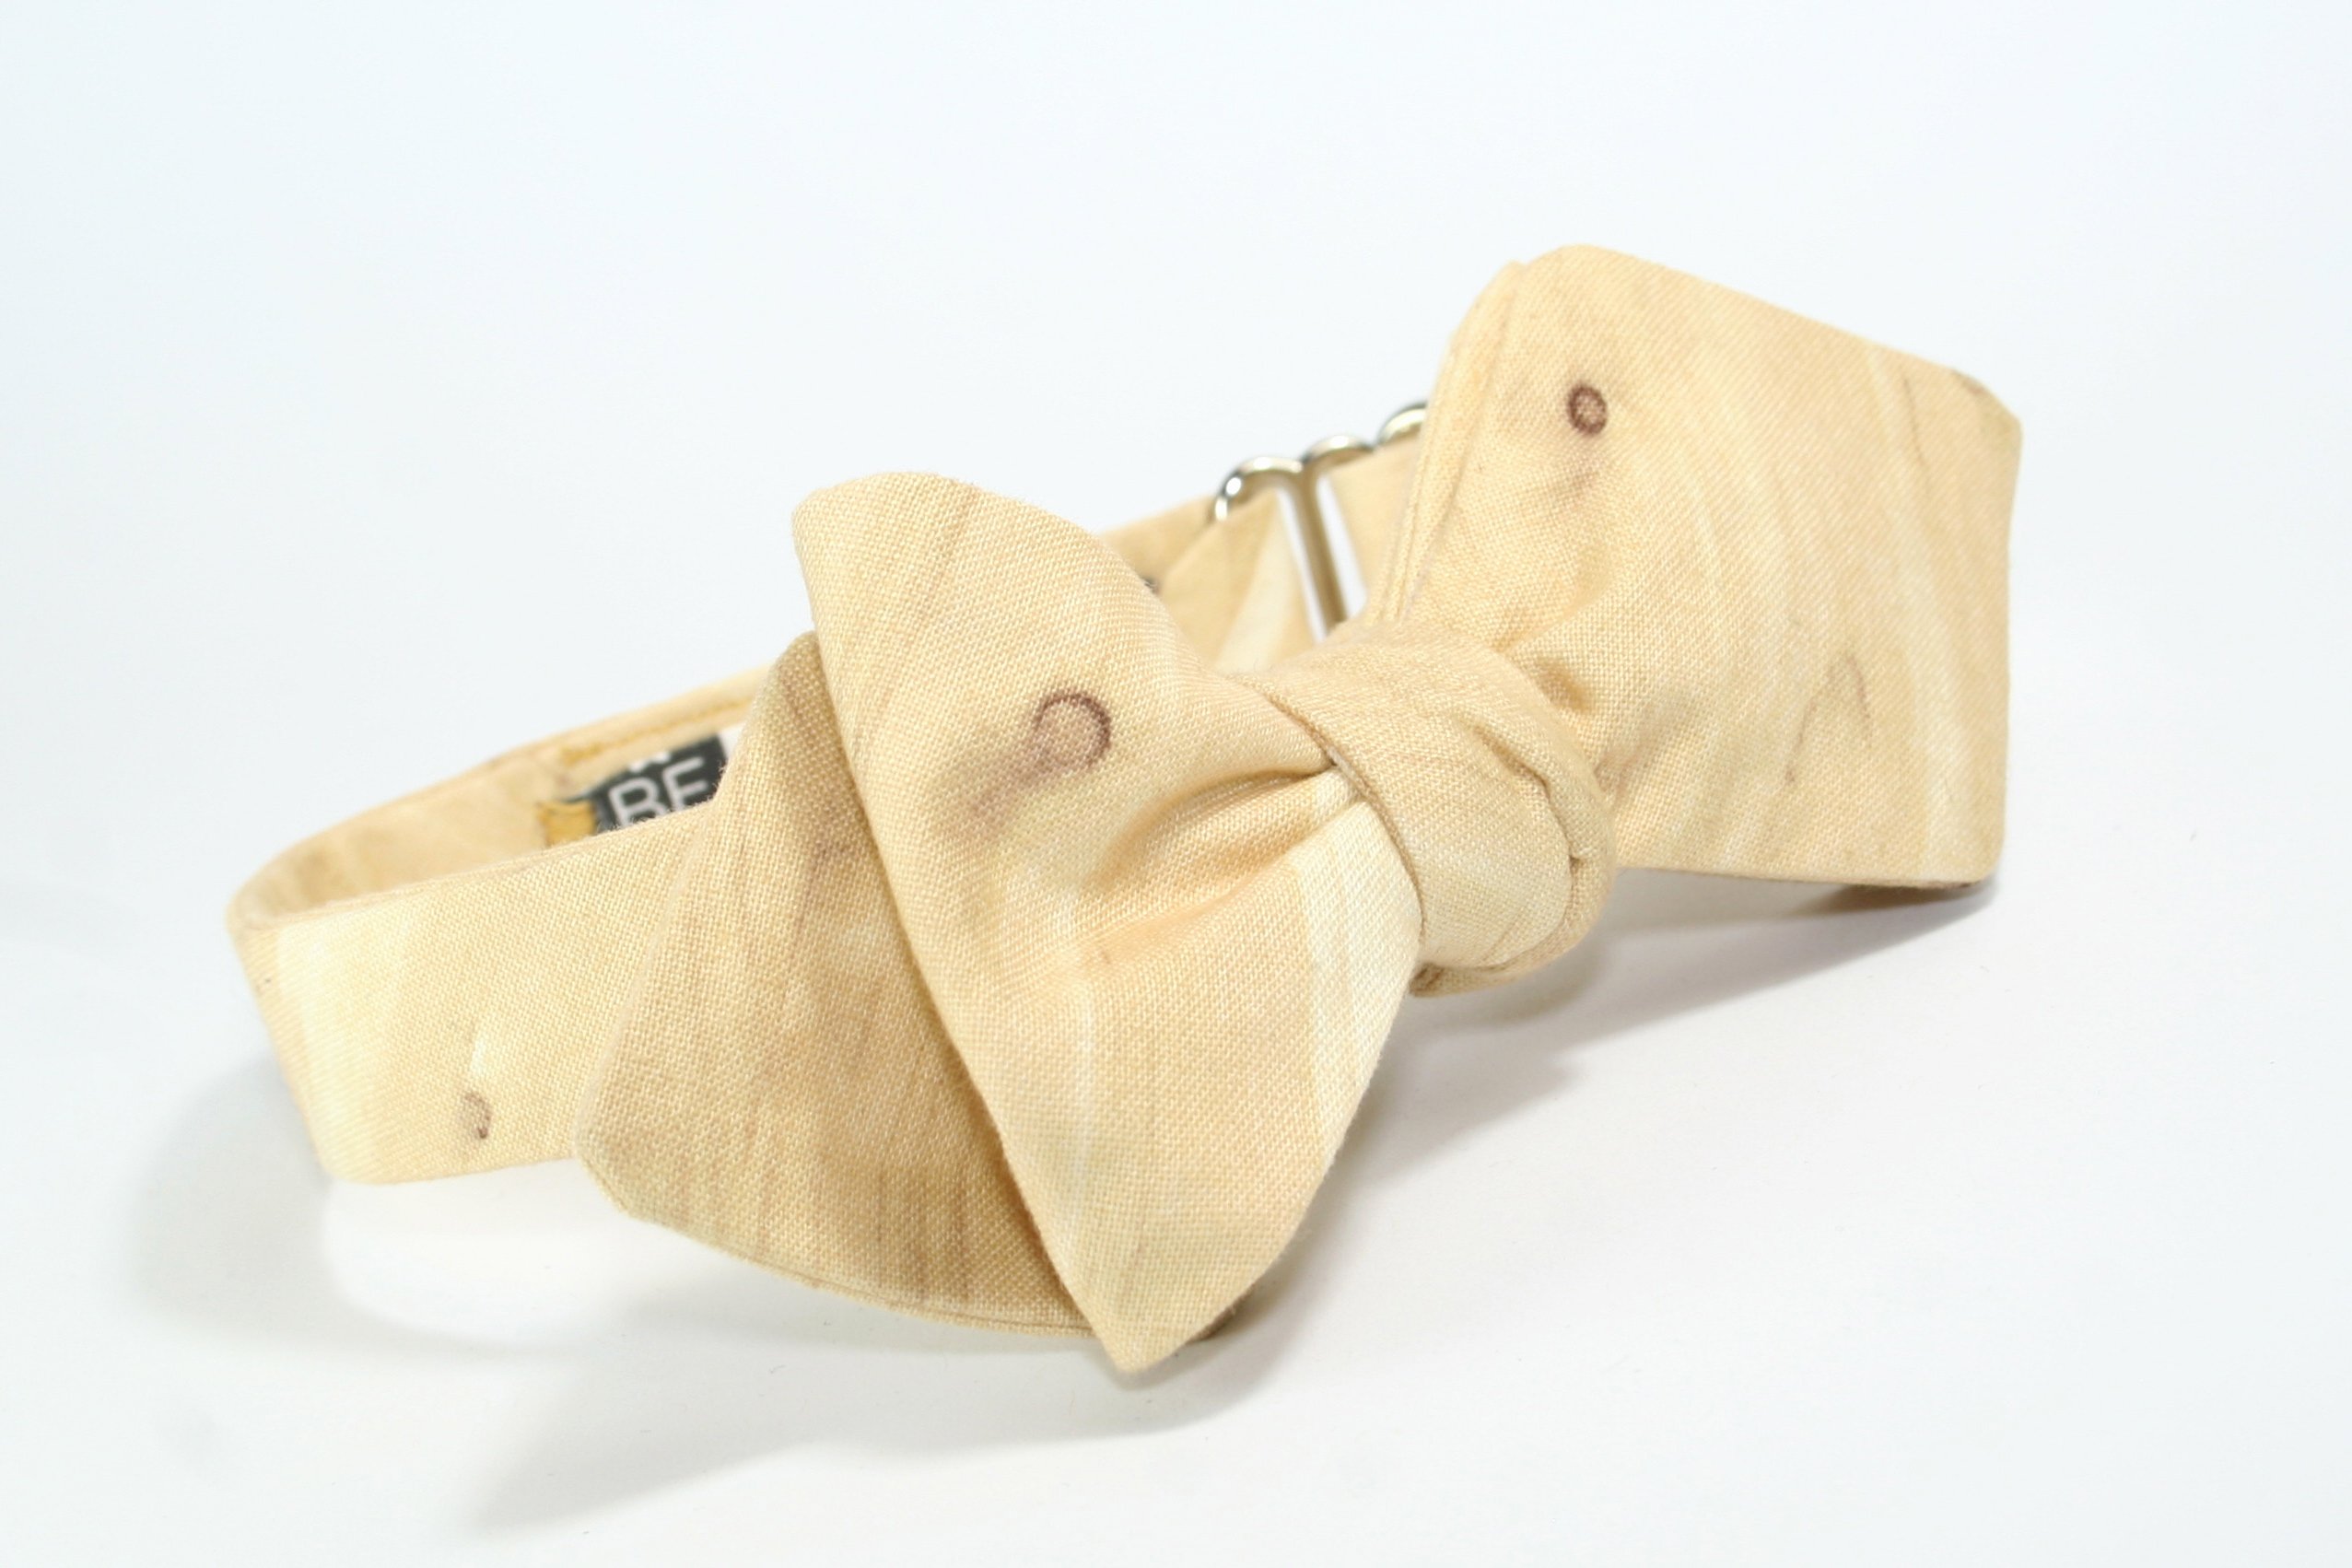 Wooden Bow Tie Template Luxury Wood Grain Print Bow Tie In Our Diamond Point Pattern